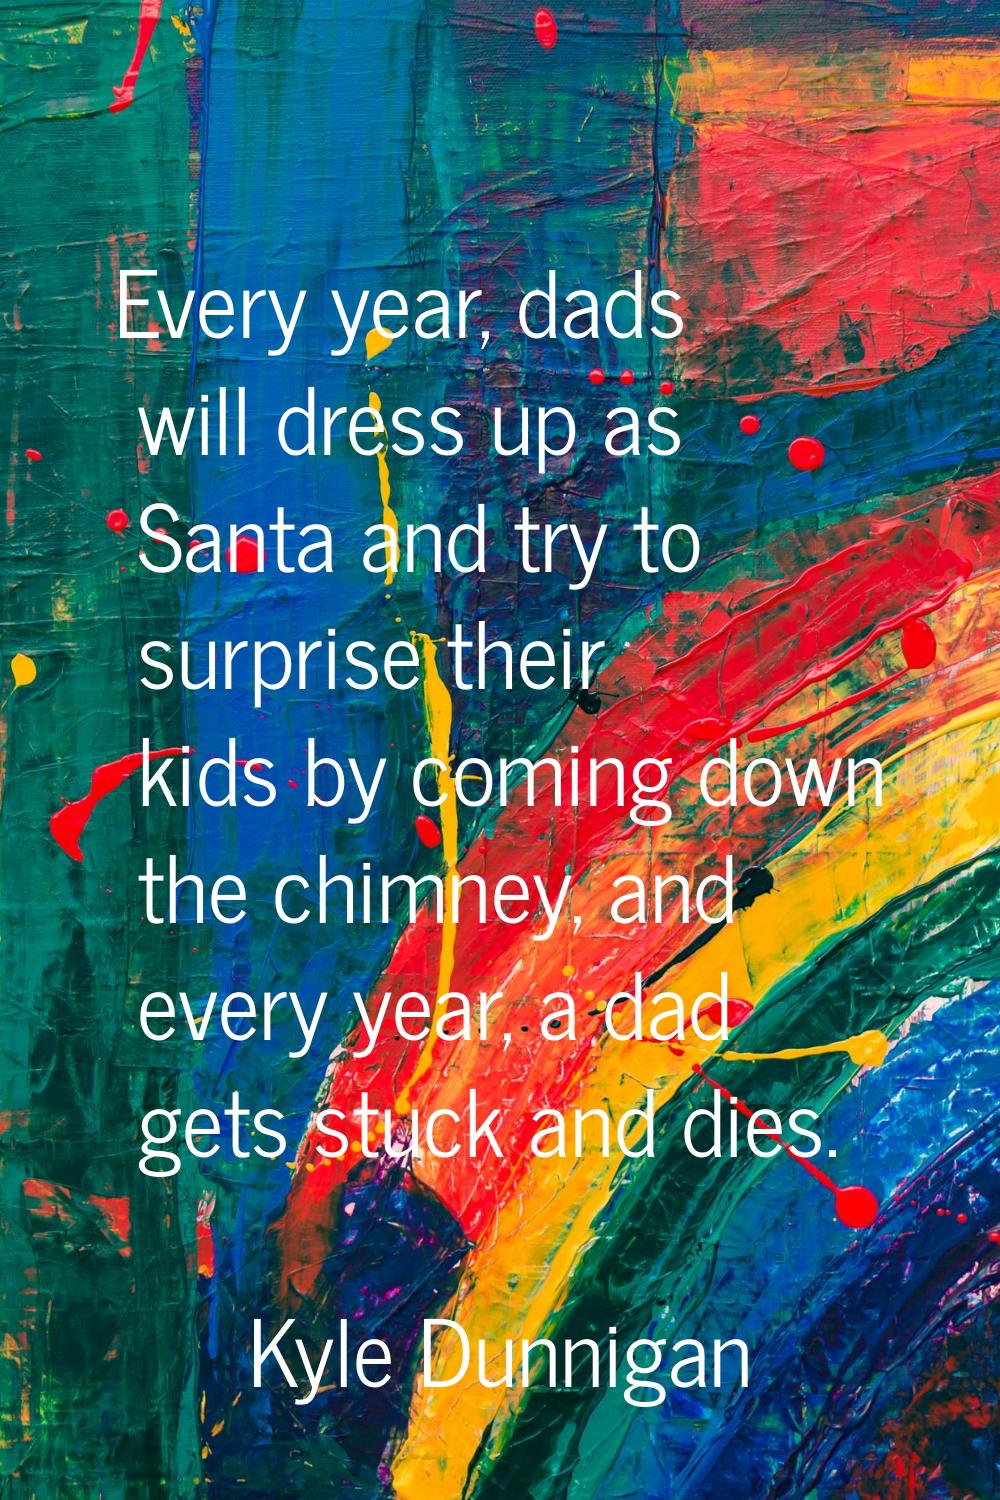 Every year, dads will dress up as Santa and try to surprise their kids by coming down the chimney, 